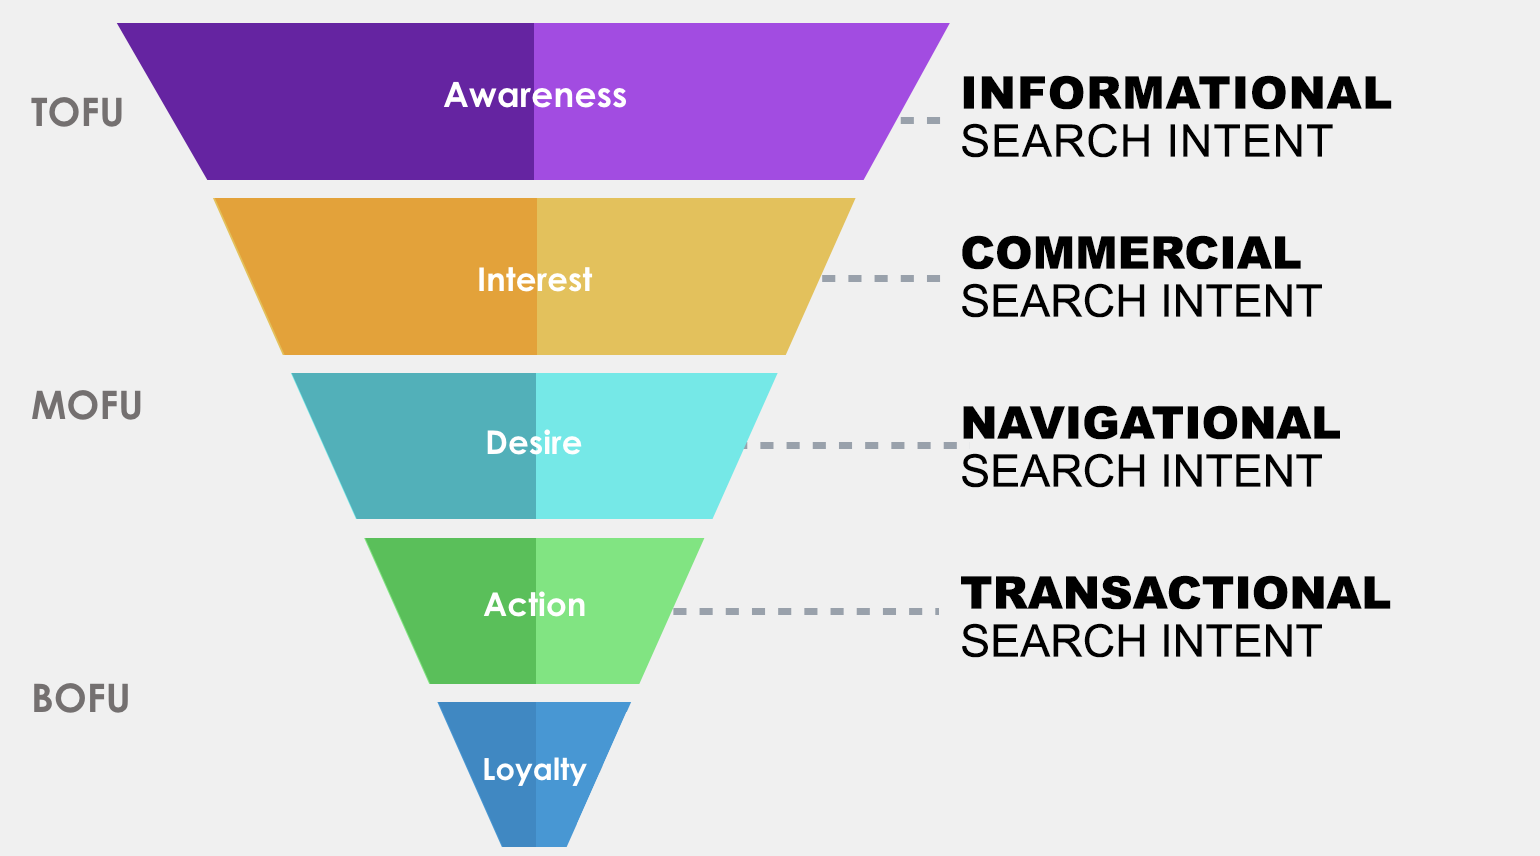 Optimizing content for each type of search intent and stage of the buyer's journey